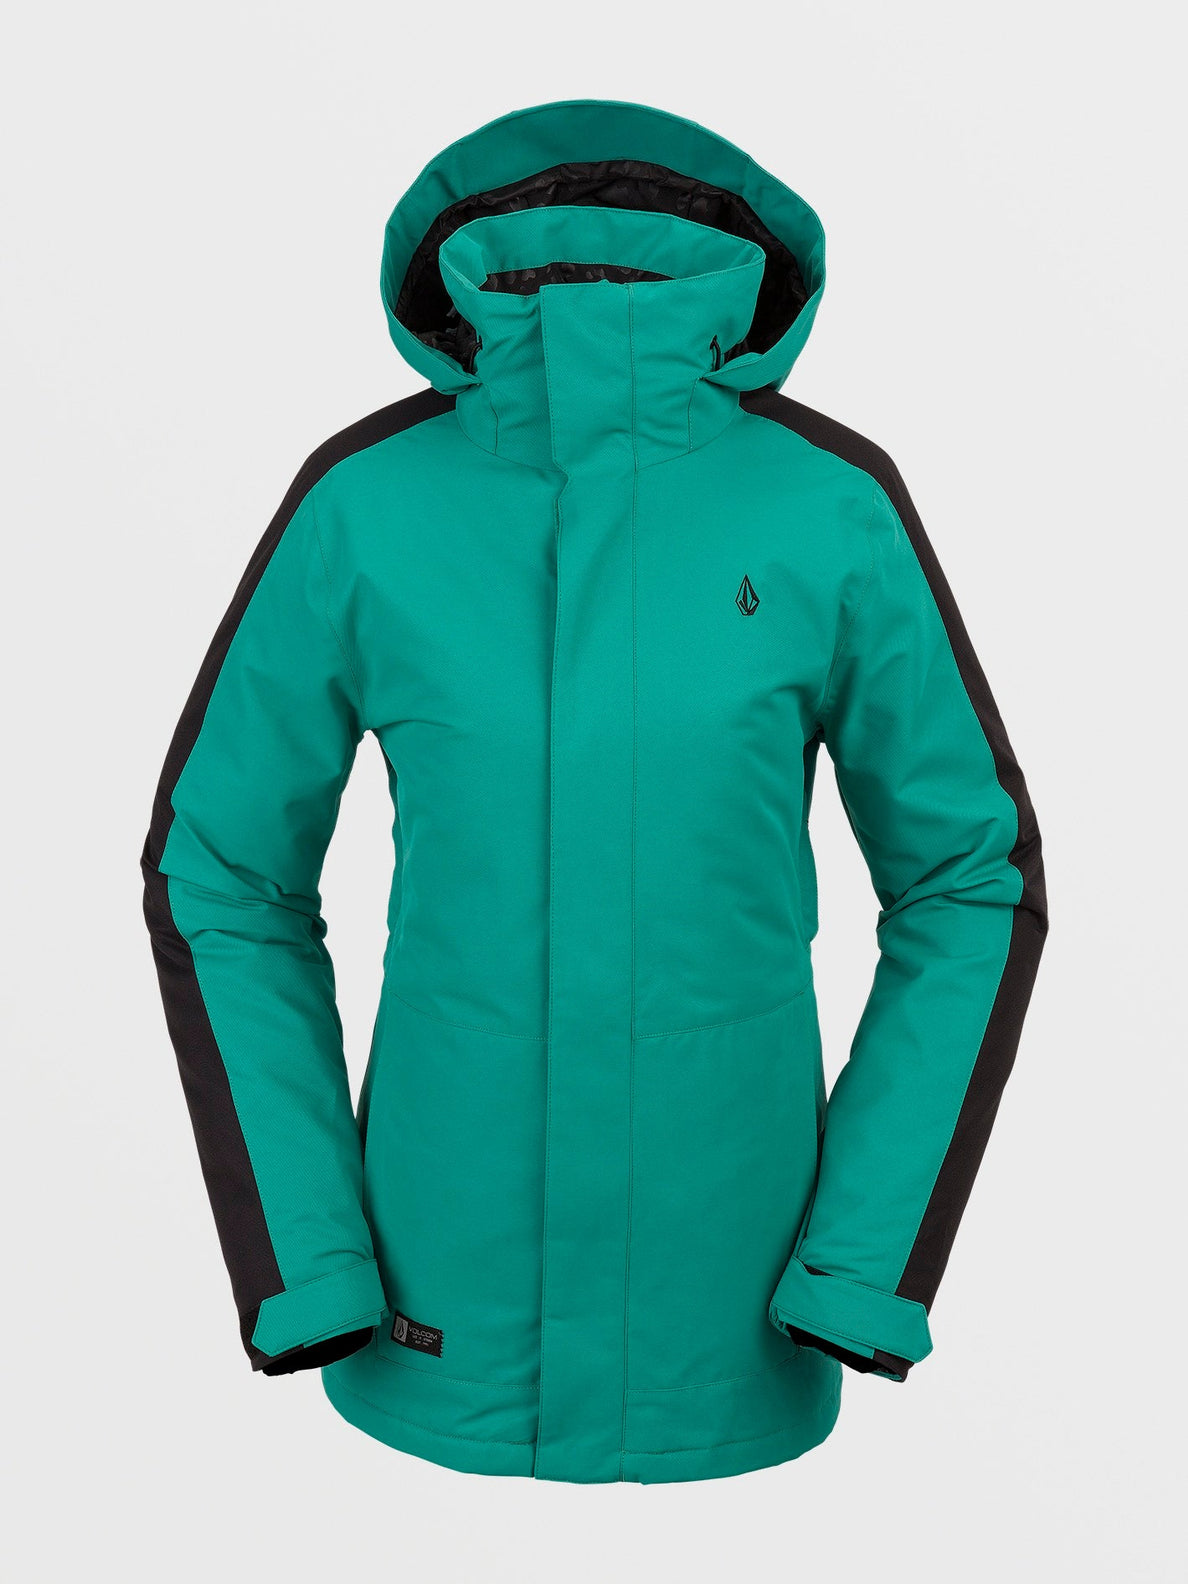 Westland Insulated Jacket - VIBRANT GREEN (H0452412_VBG) [F]